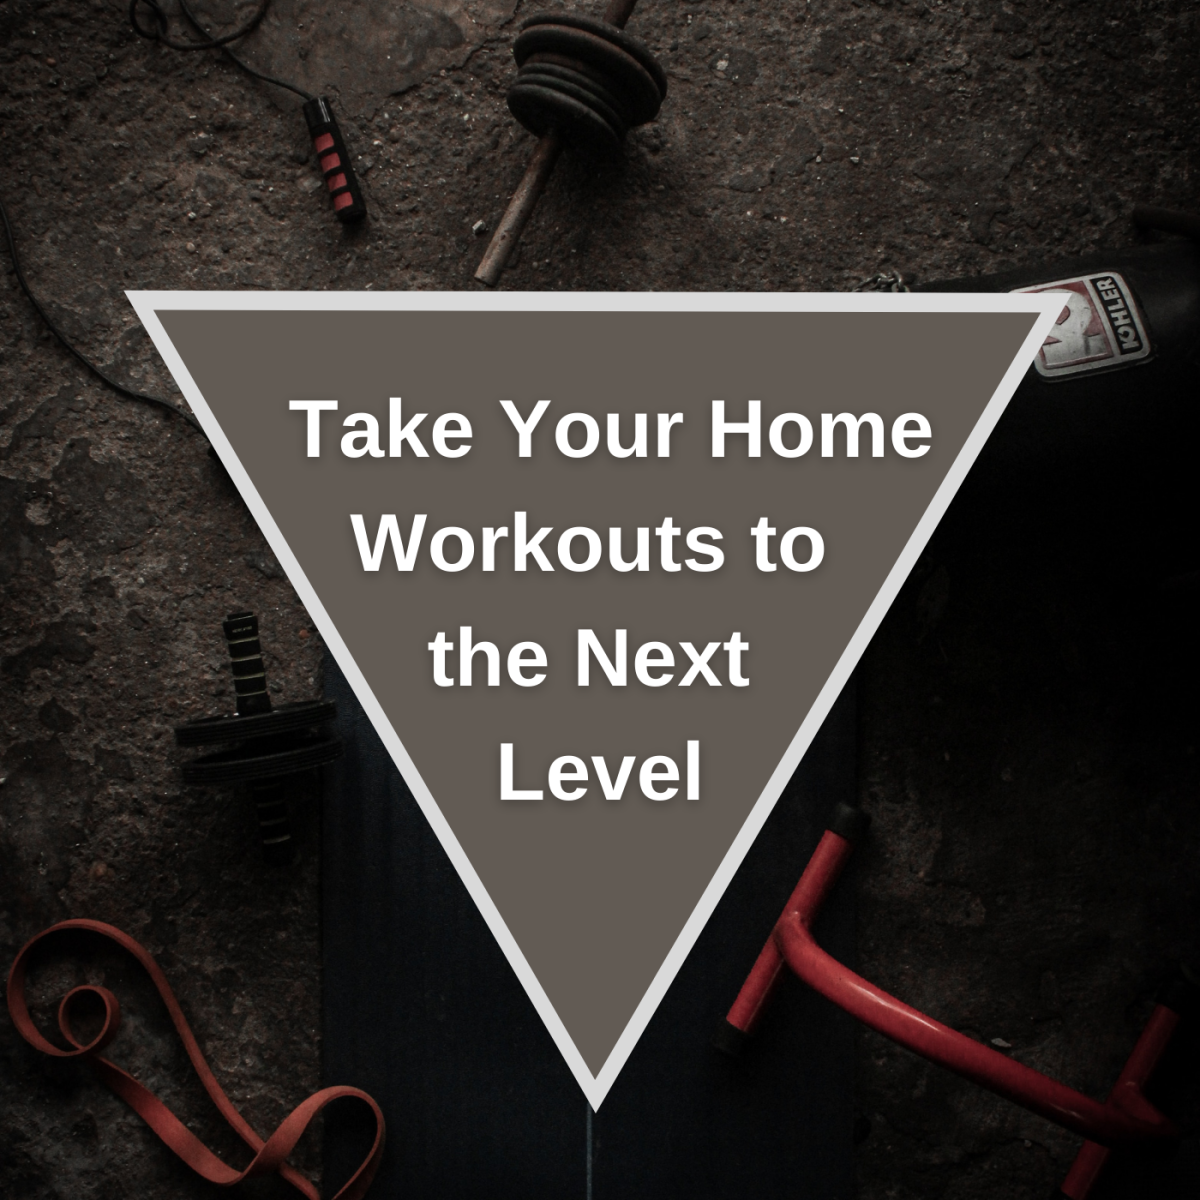 What is essential for your home gym?